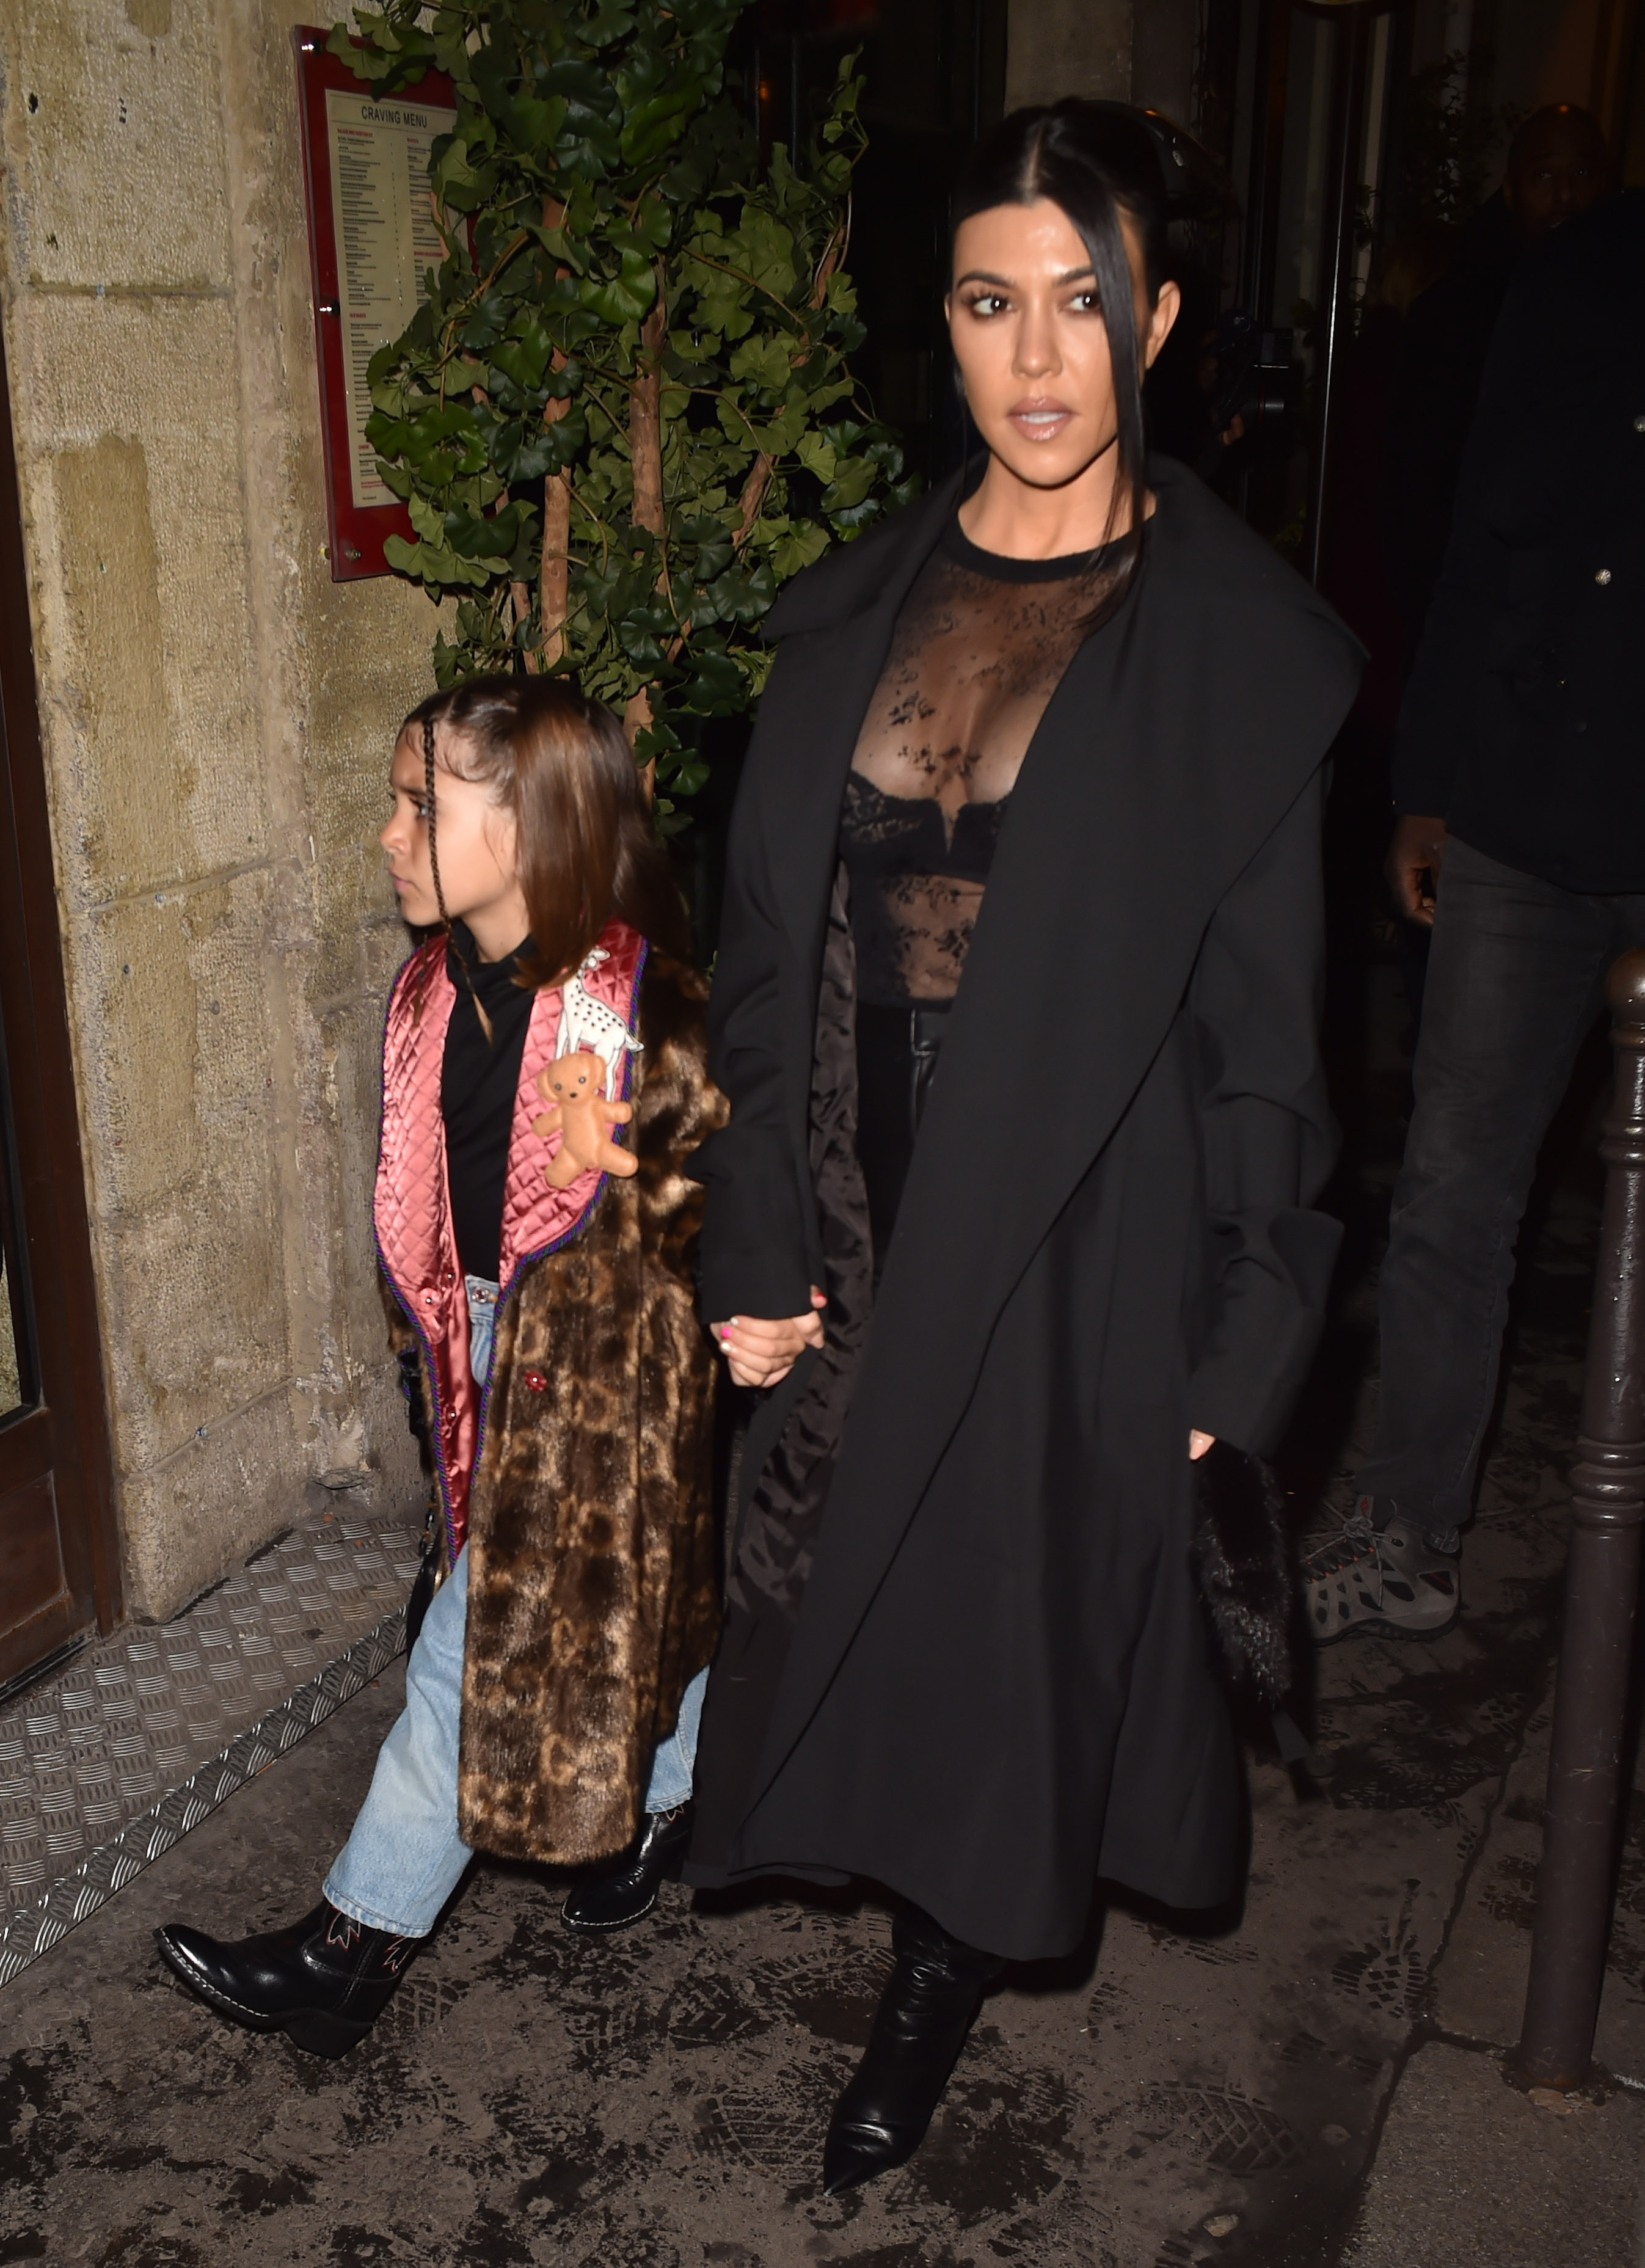 Kim Kardashian West and Kourtney Kardashian ride Eiffel Tower carousel with daughters North West and Penelope Disick